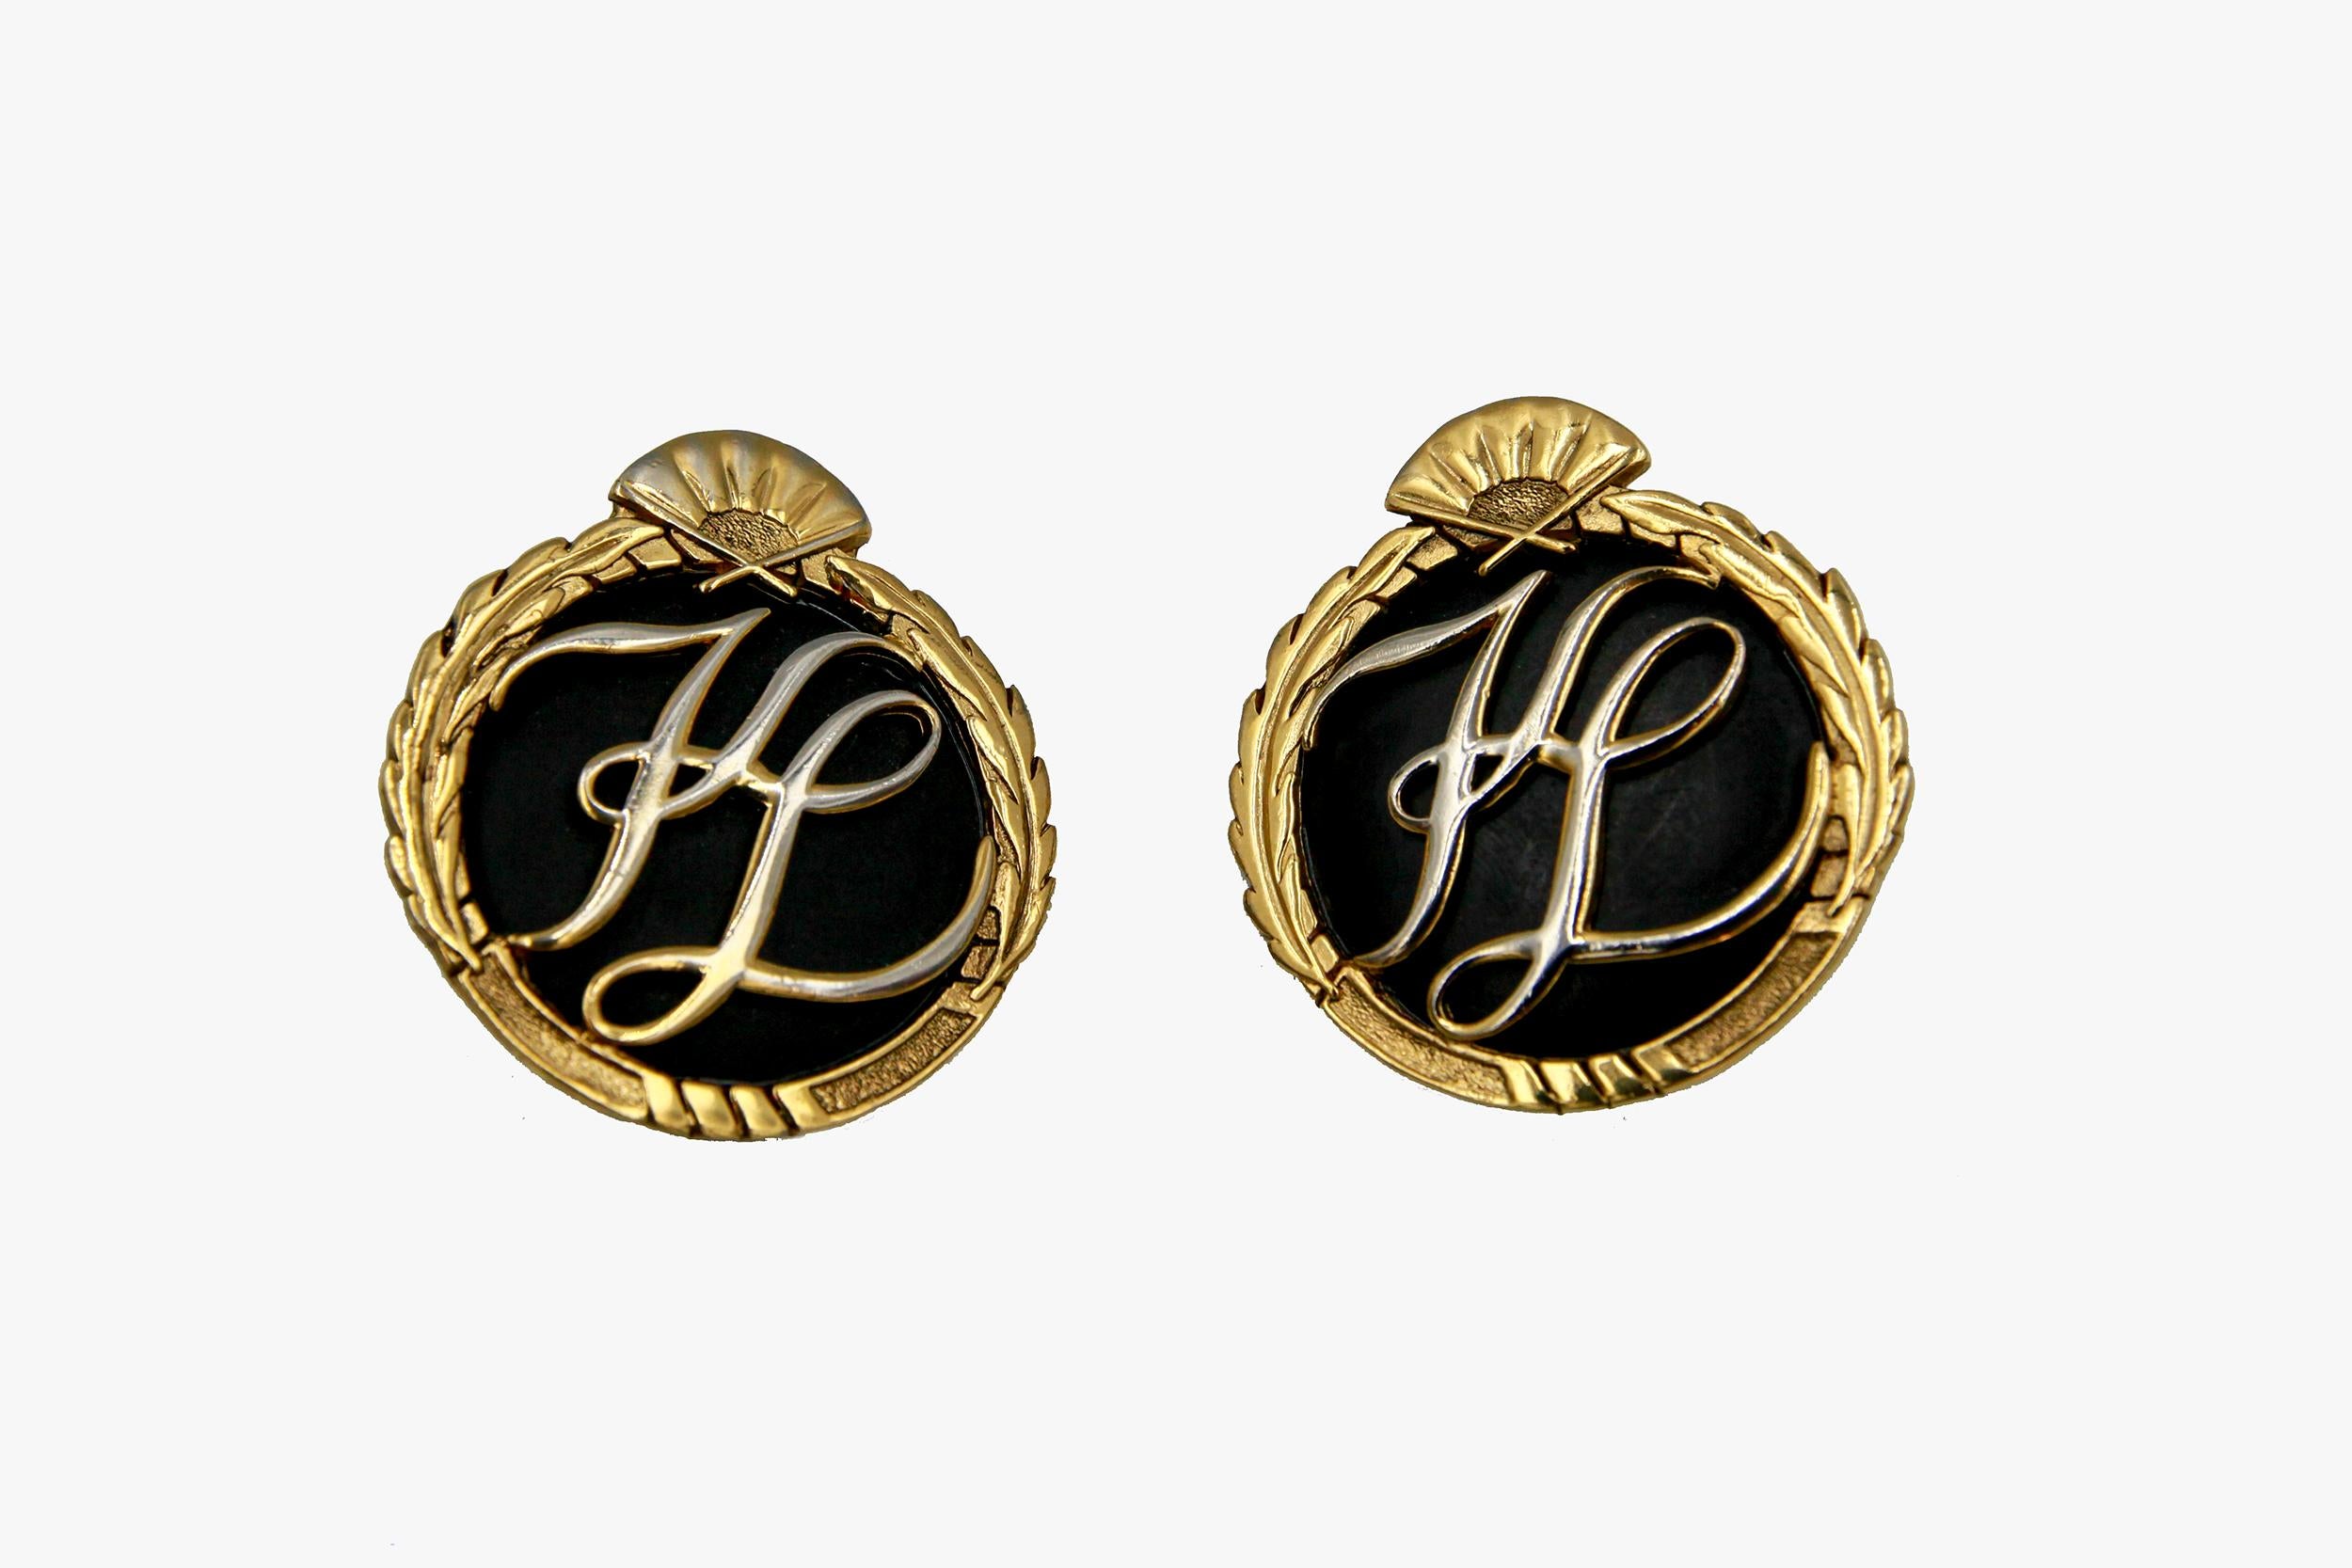 Karl Lagerfeld vintage oversized clip-on earrings featuring KL monogram on black enamel framed in gold tone wreath with a fan on the top.

Signed.

Period: 1990s

Condition: Very Good. Minor scratches throughout metal.

Diameter: 4